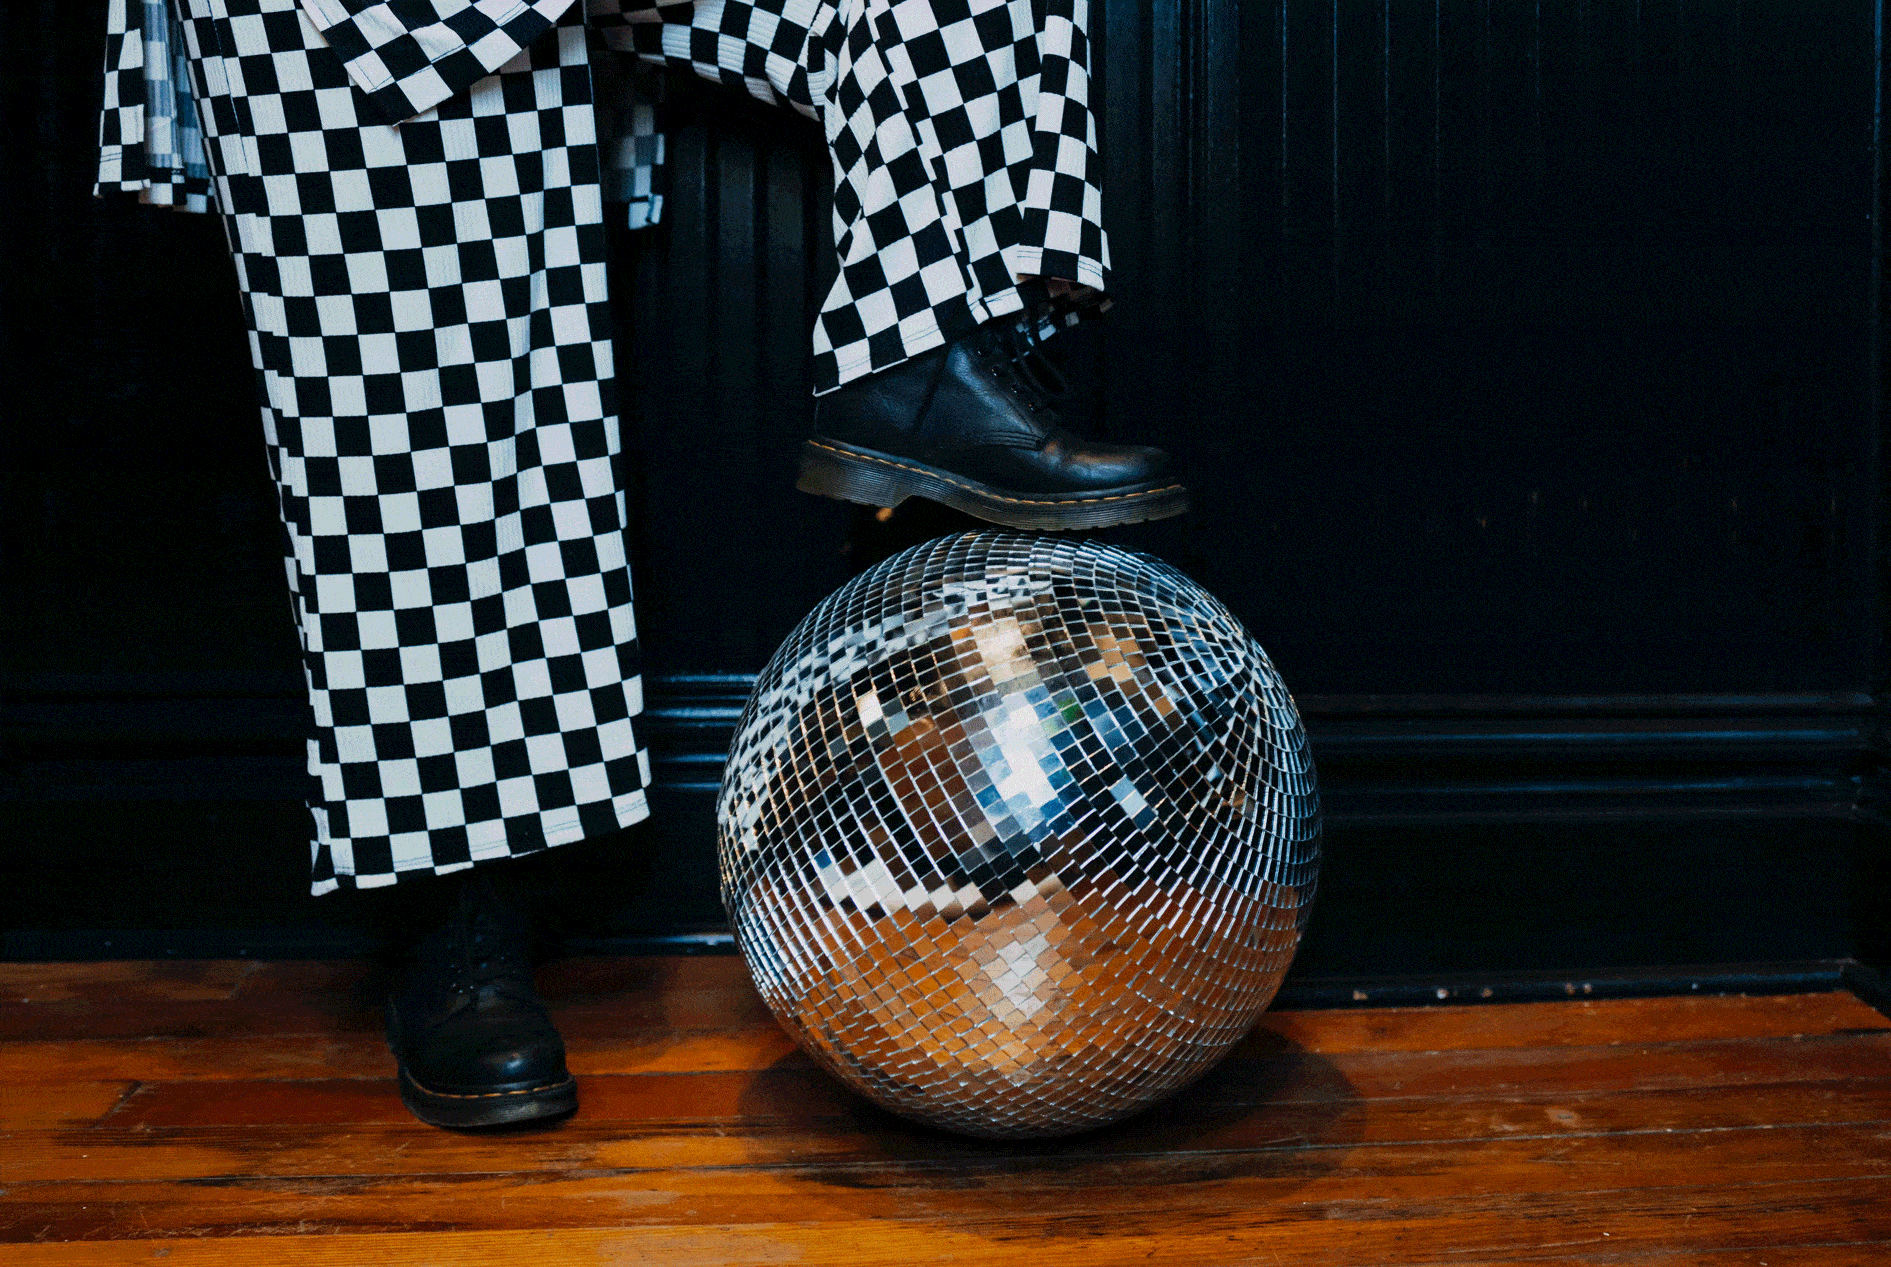 A foot resting on a disco ball.